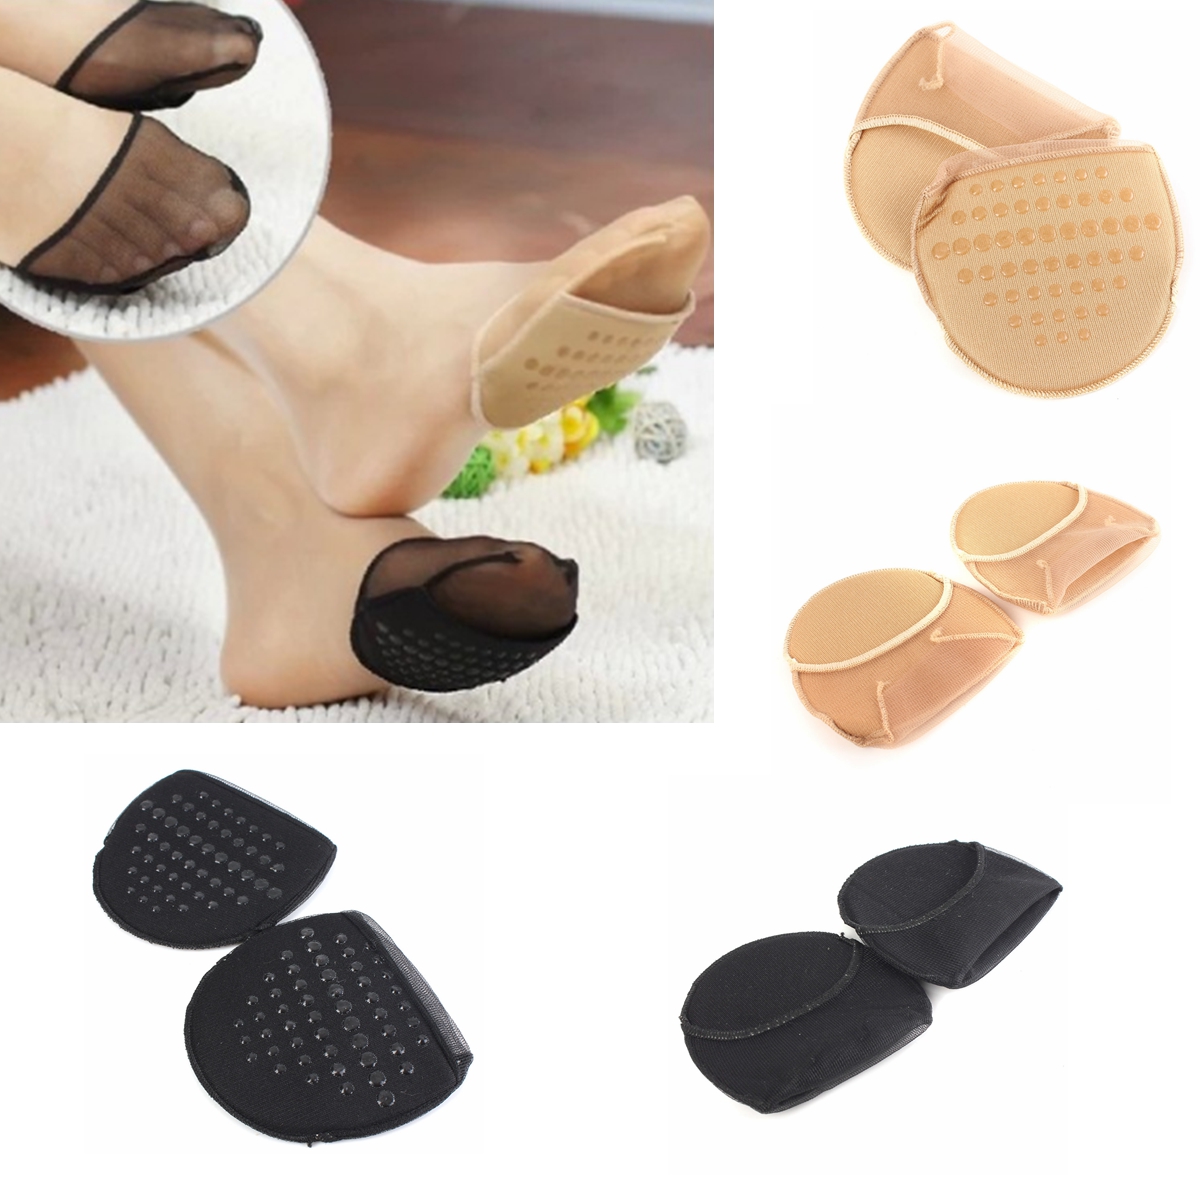 2-Cushion-Pads-Footful-Ball-of-Foot-Insoles-Gel-Pads-Cushion-Metatarsal-Sore-Forefoot-Support-1242142